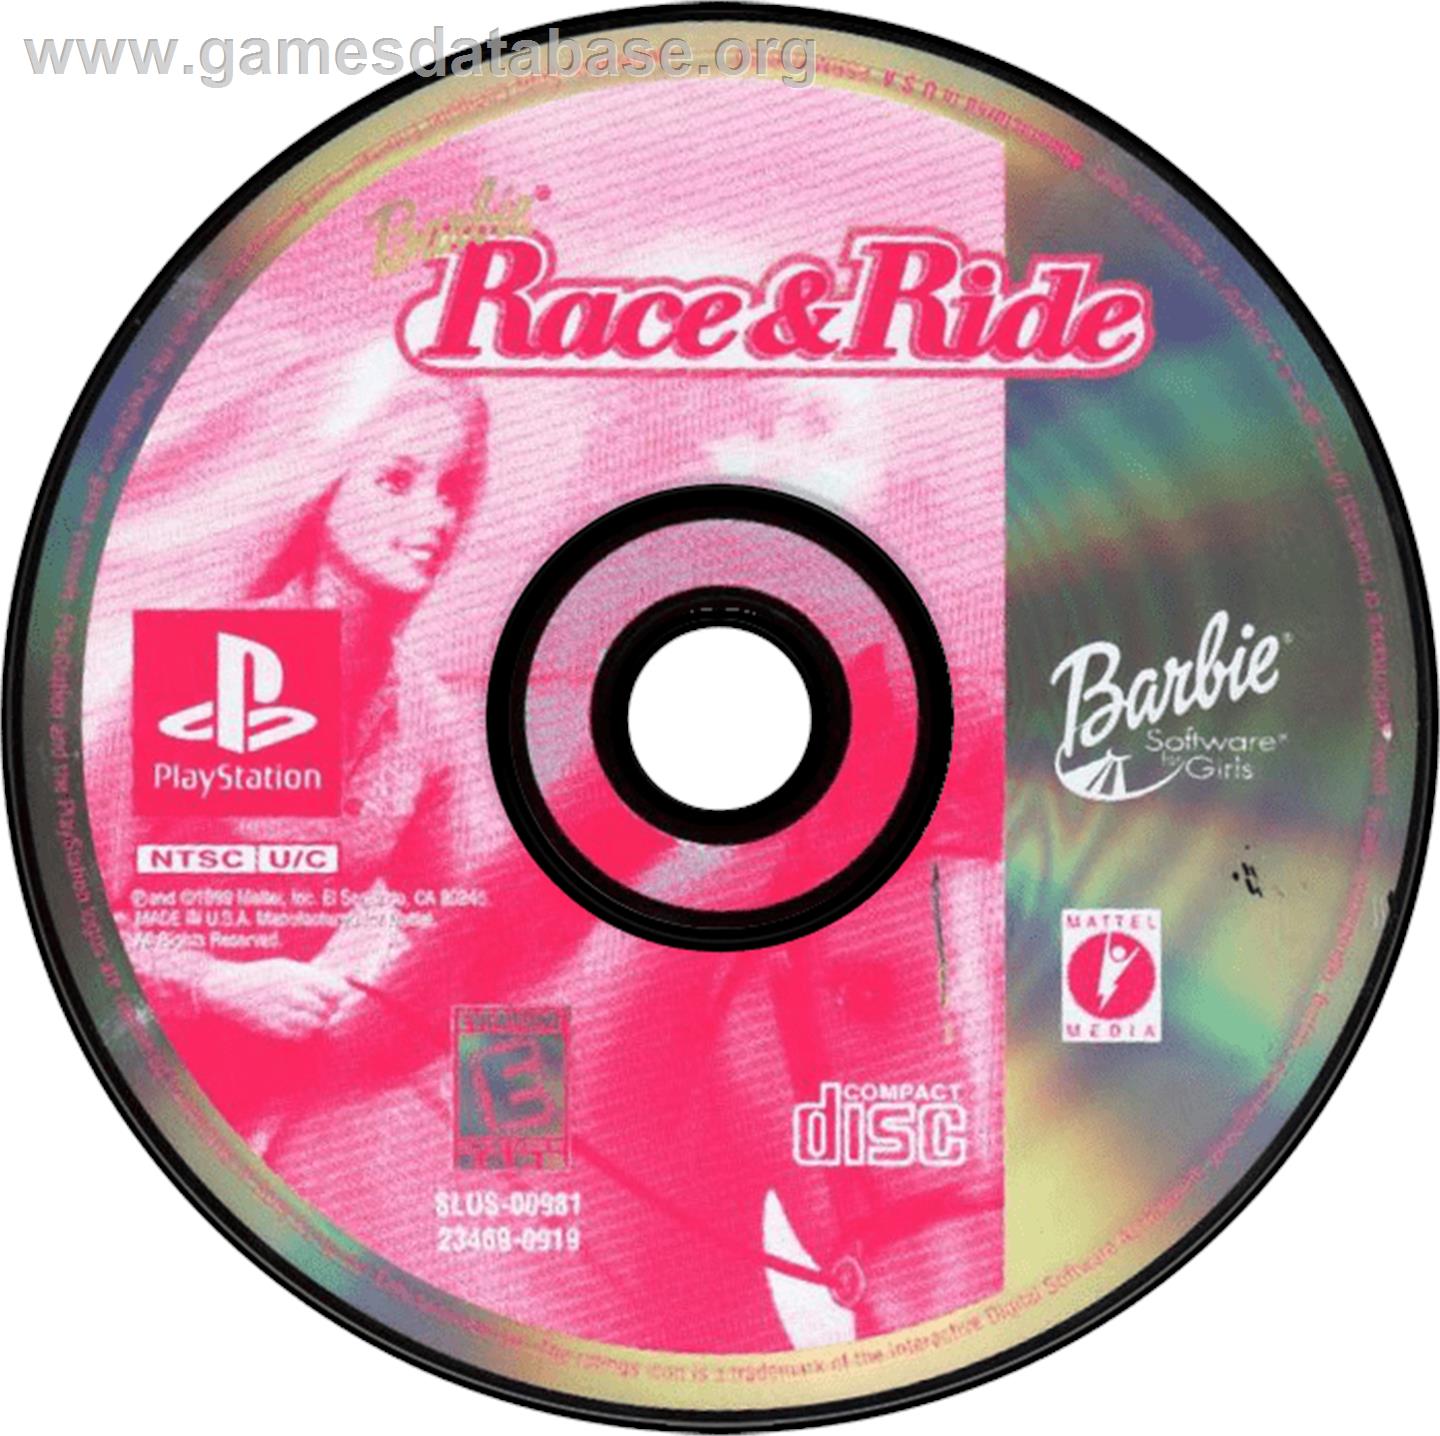 Barbie: Race and Ride - Sony Playstation - Artwork - Disc